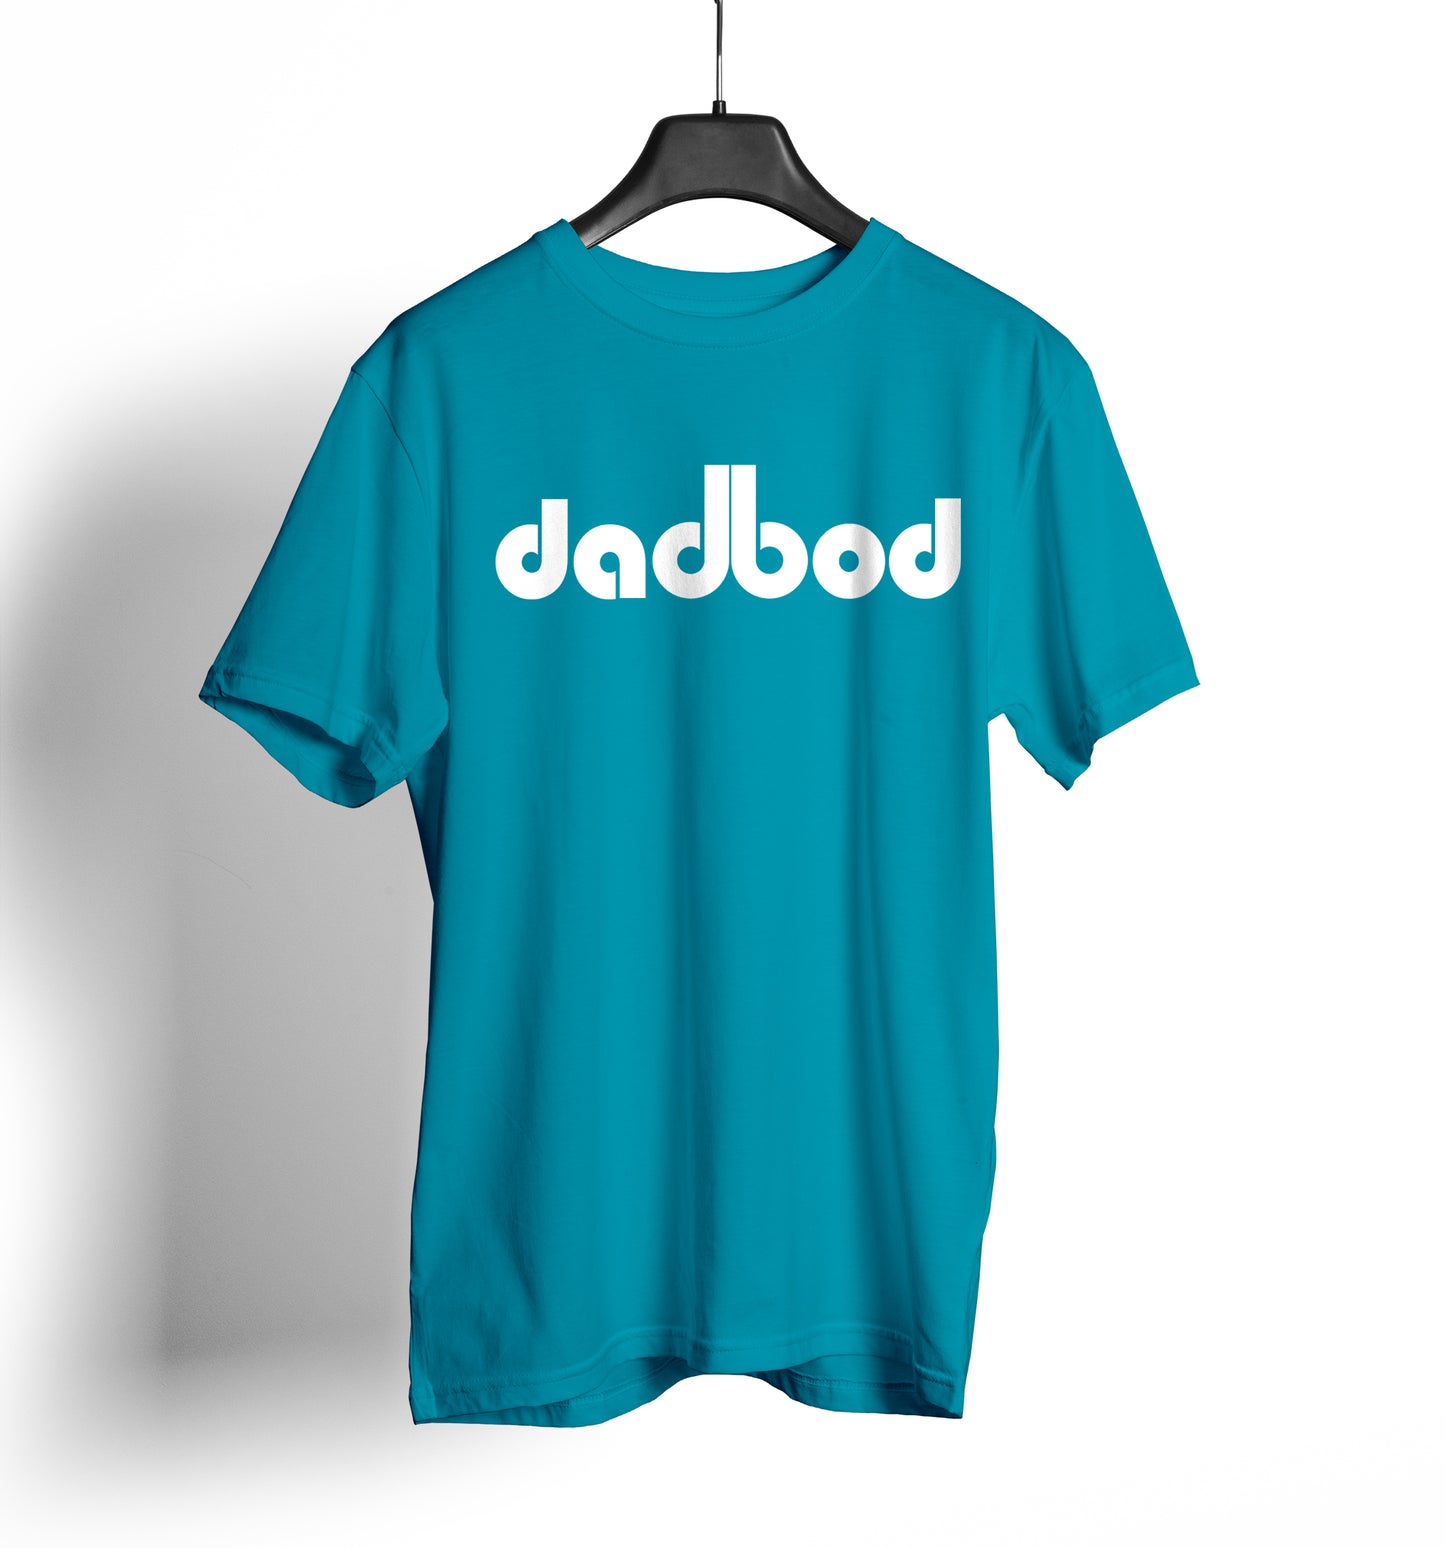 Dirty Bags Cornhole "dadbod" - Turquoise and White